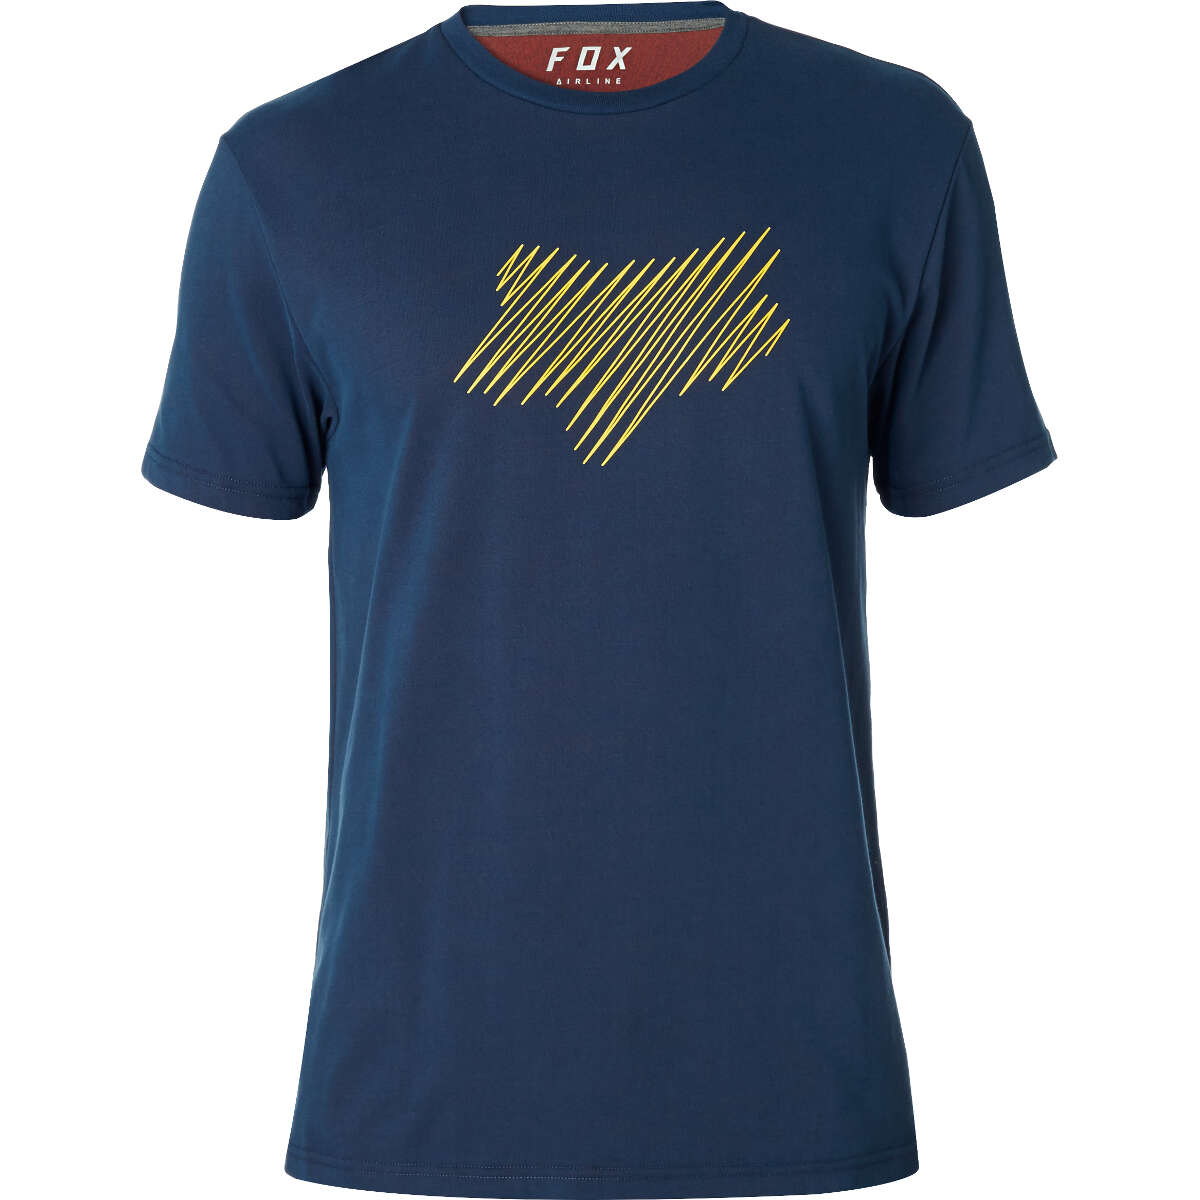 Fox T-Shirt Cresent Airline Navy/Red